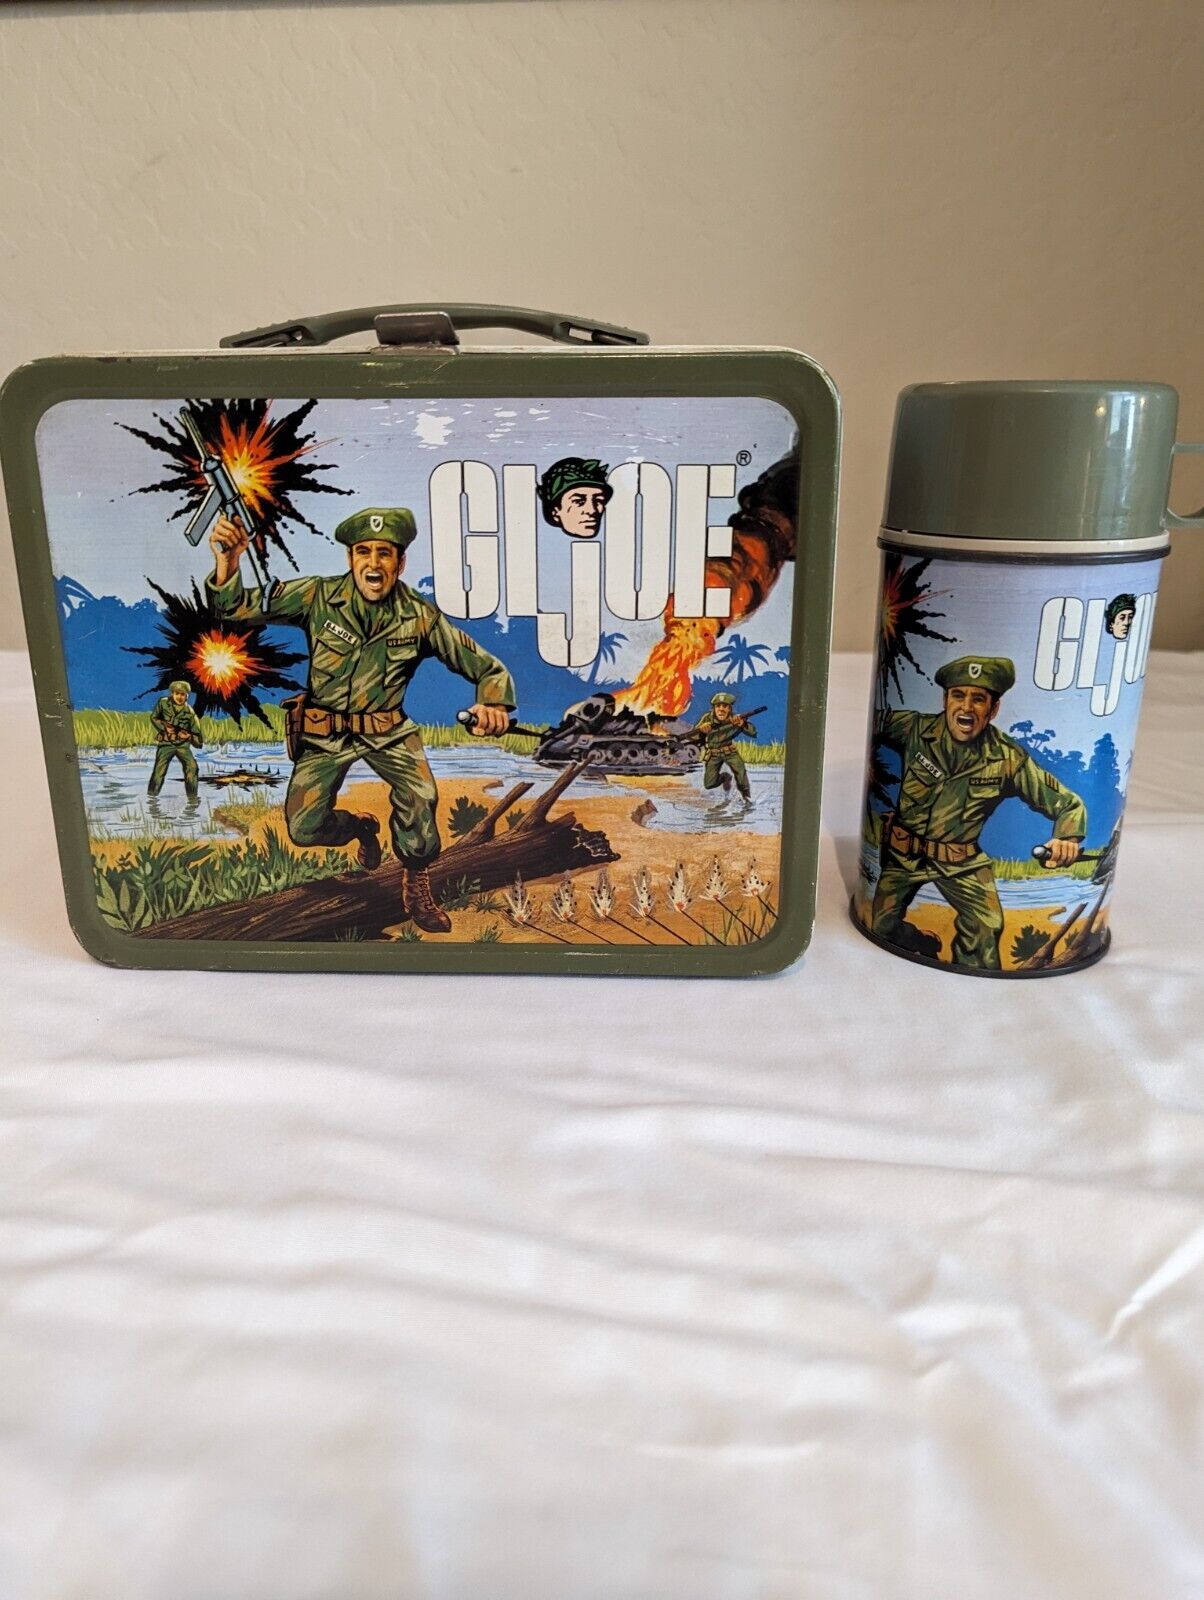 1967 G.I. GI JOE LUNCH BOX AND THERMOS - Great condition